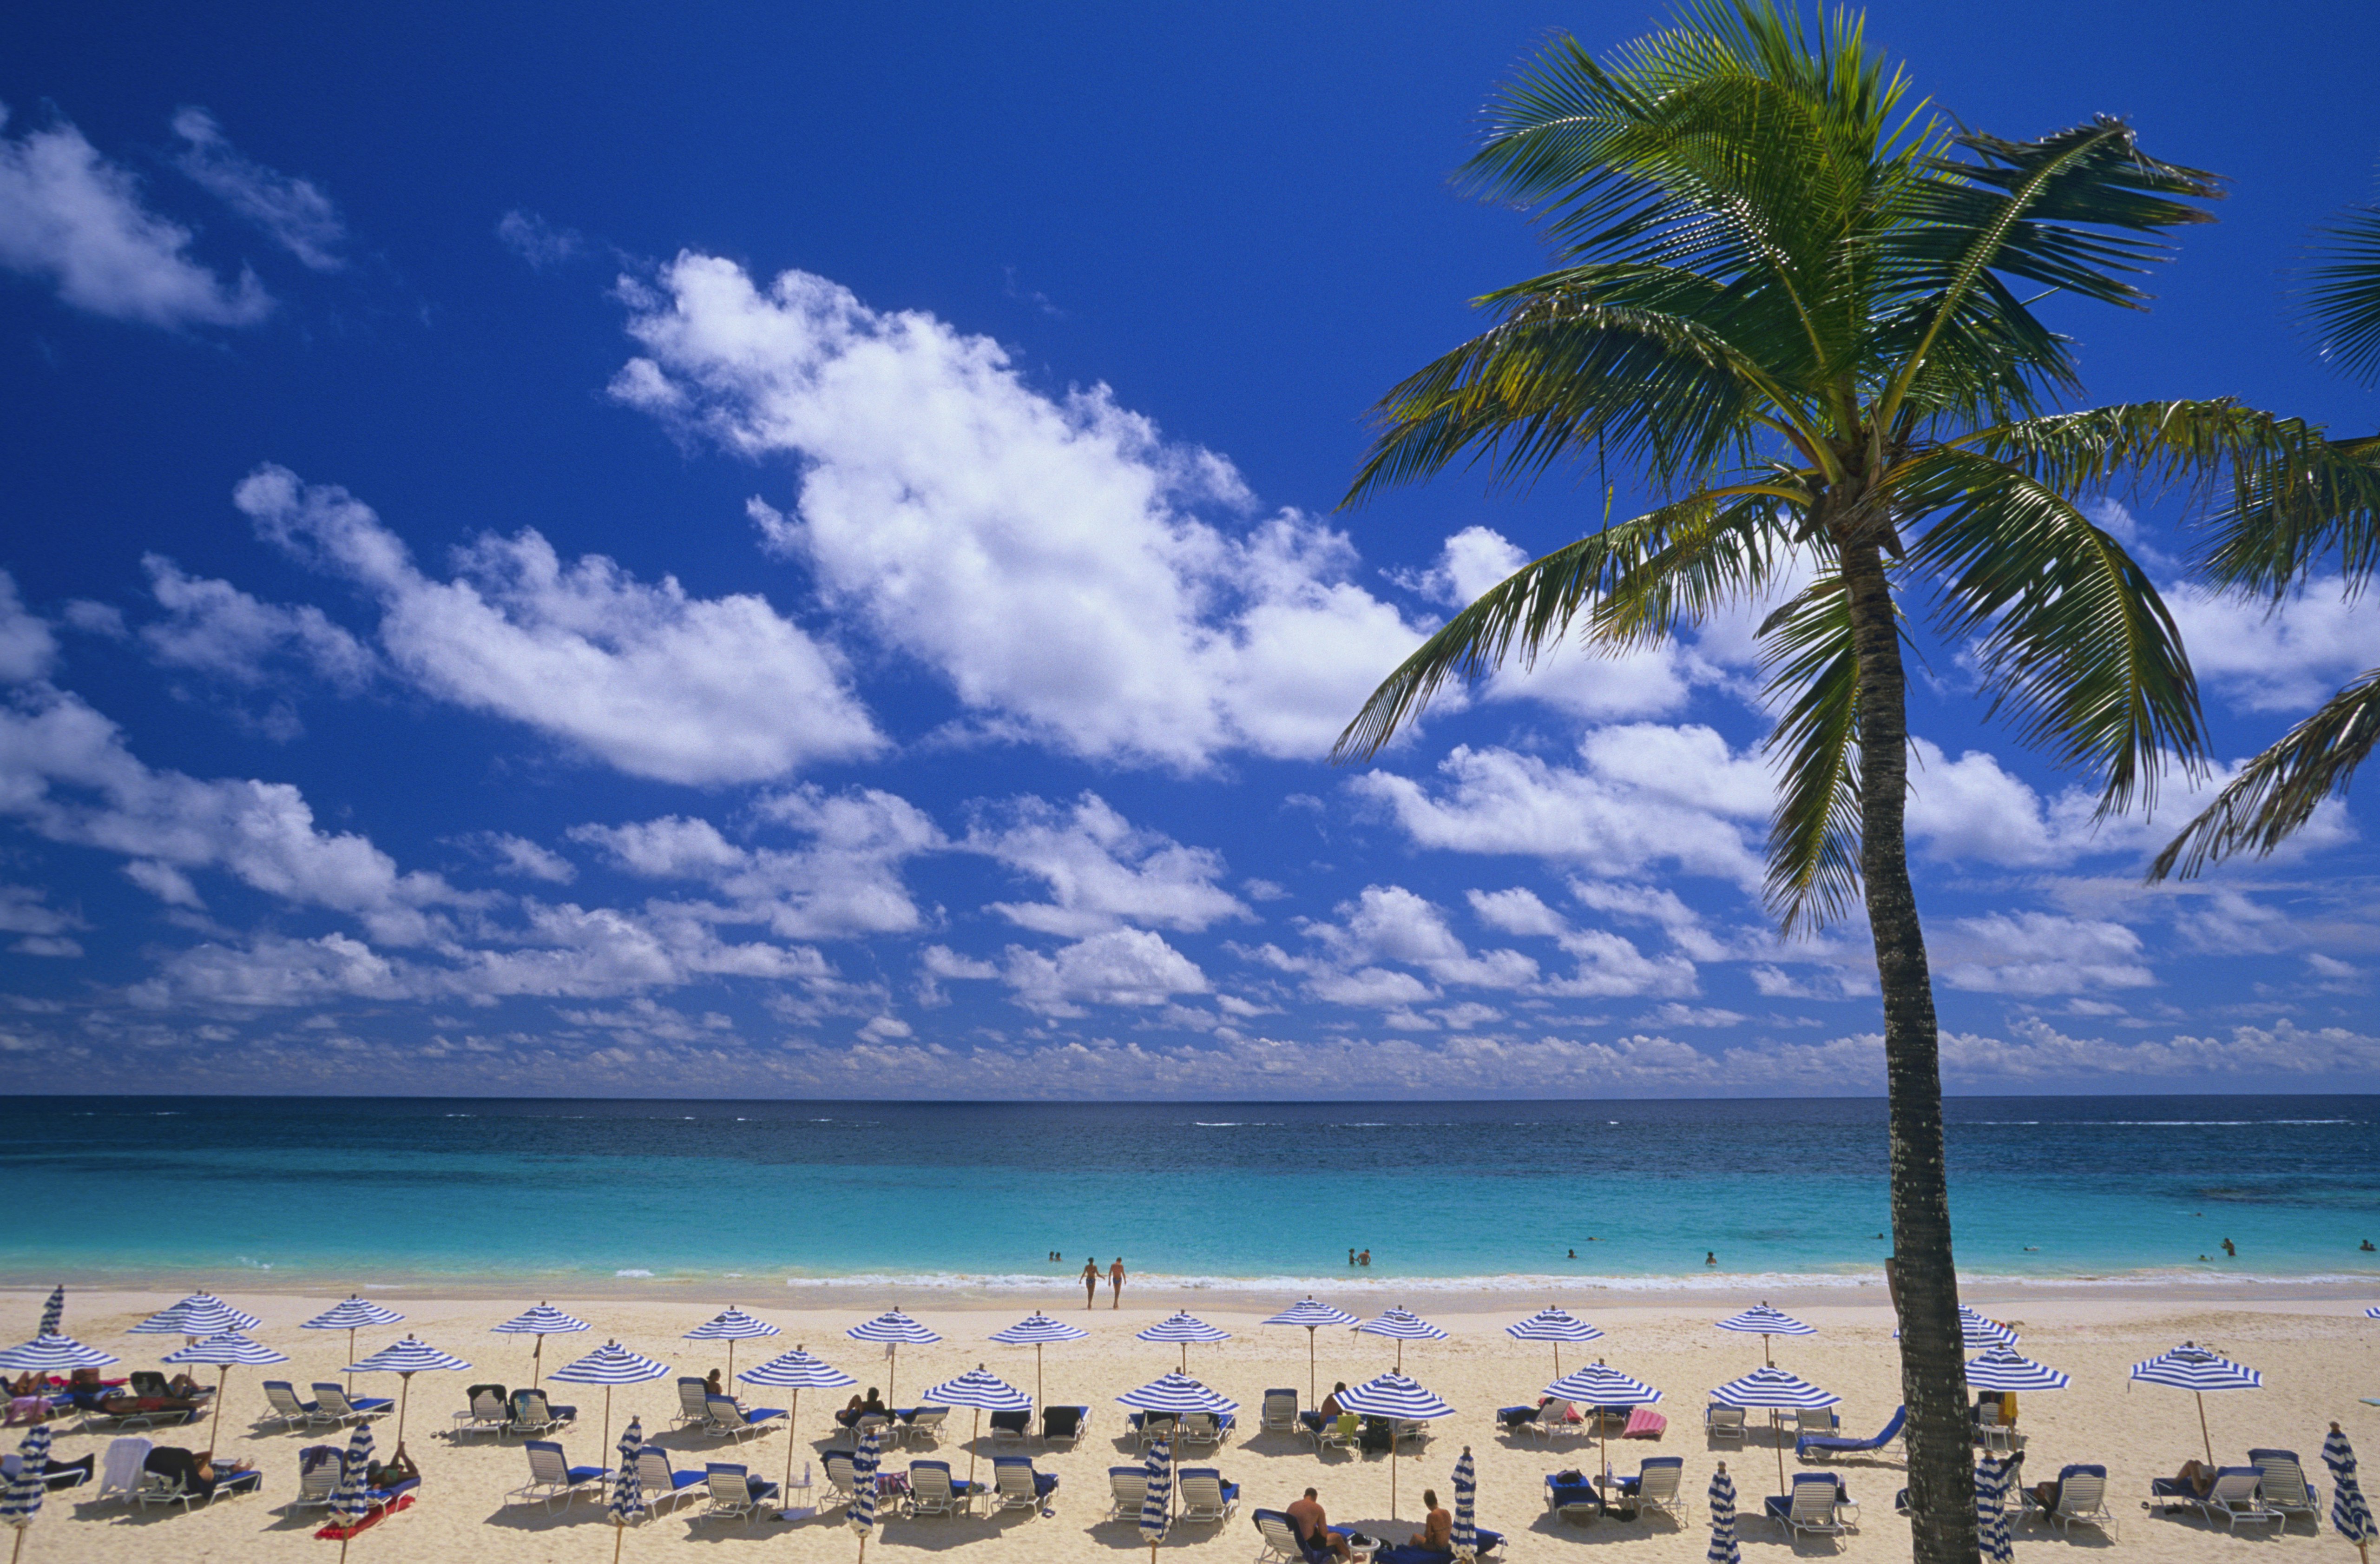 Beach loungers with blue-and-white striped umbrellas on Elbow Beach in Bermuda